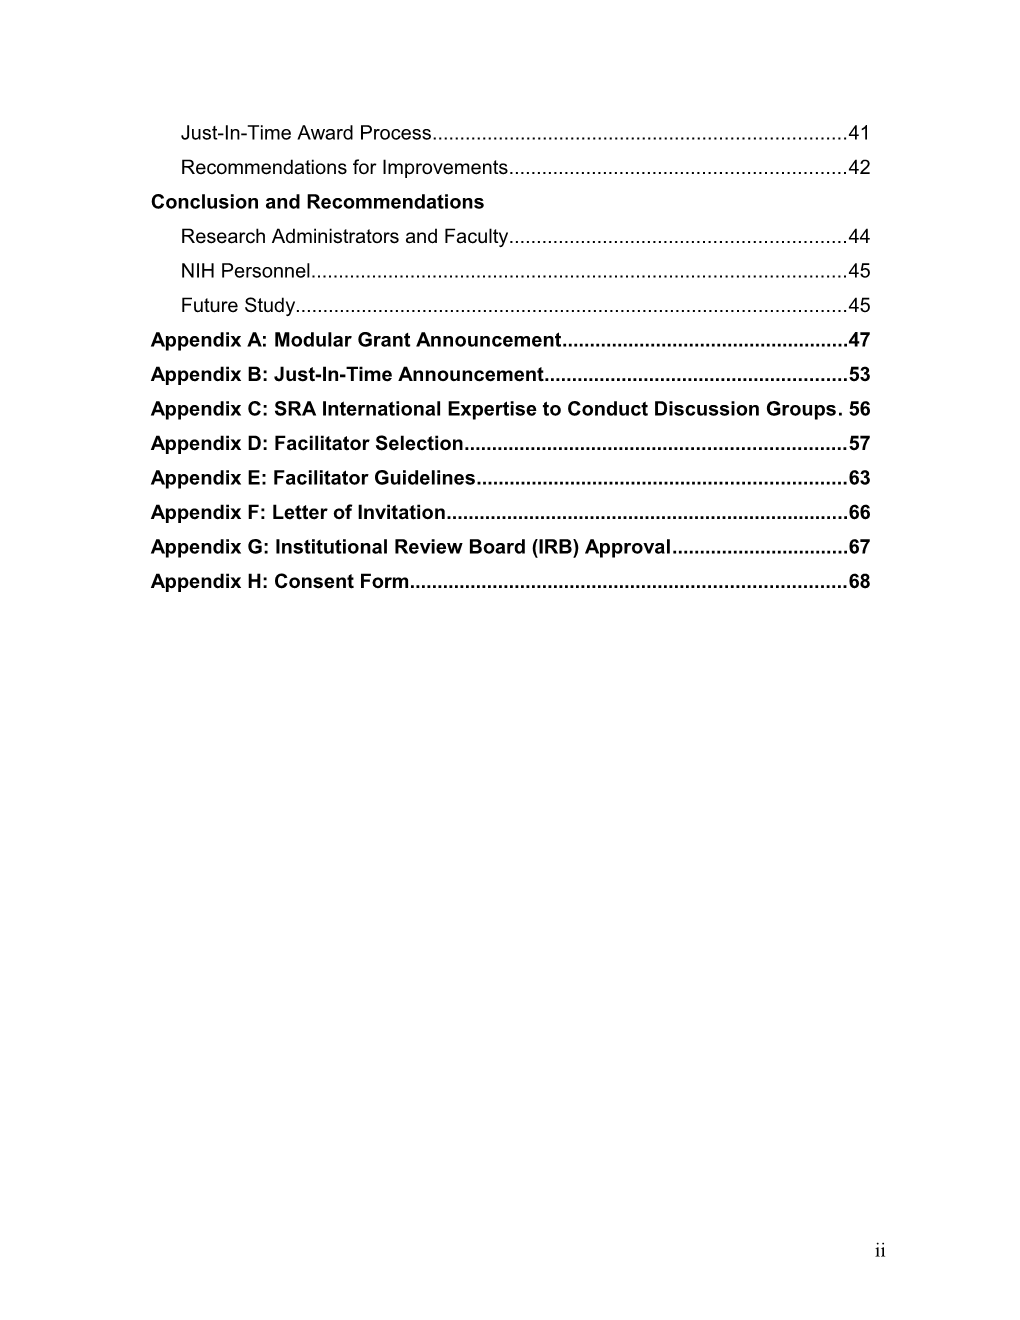 Table of Contents s303